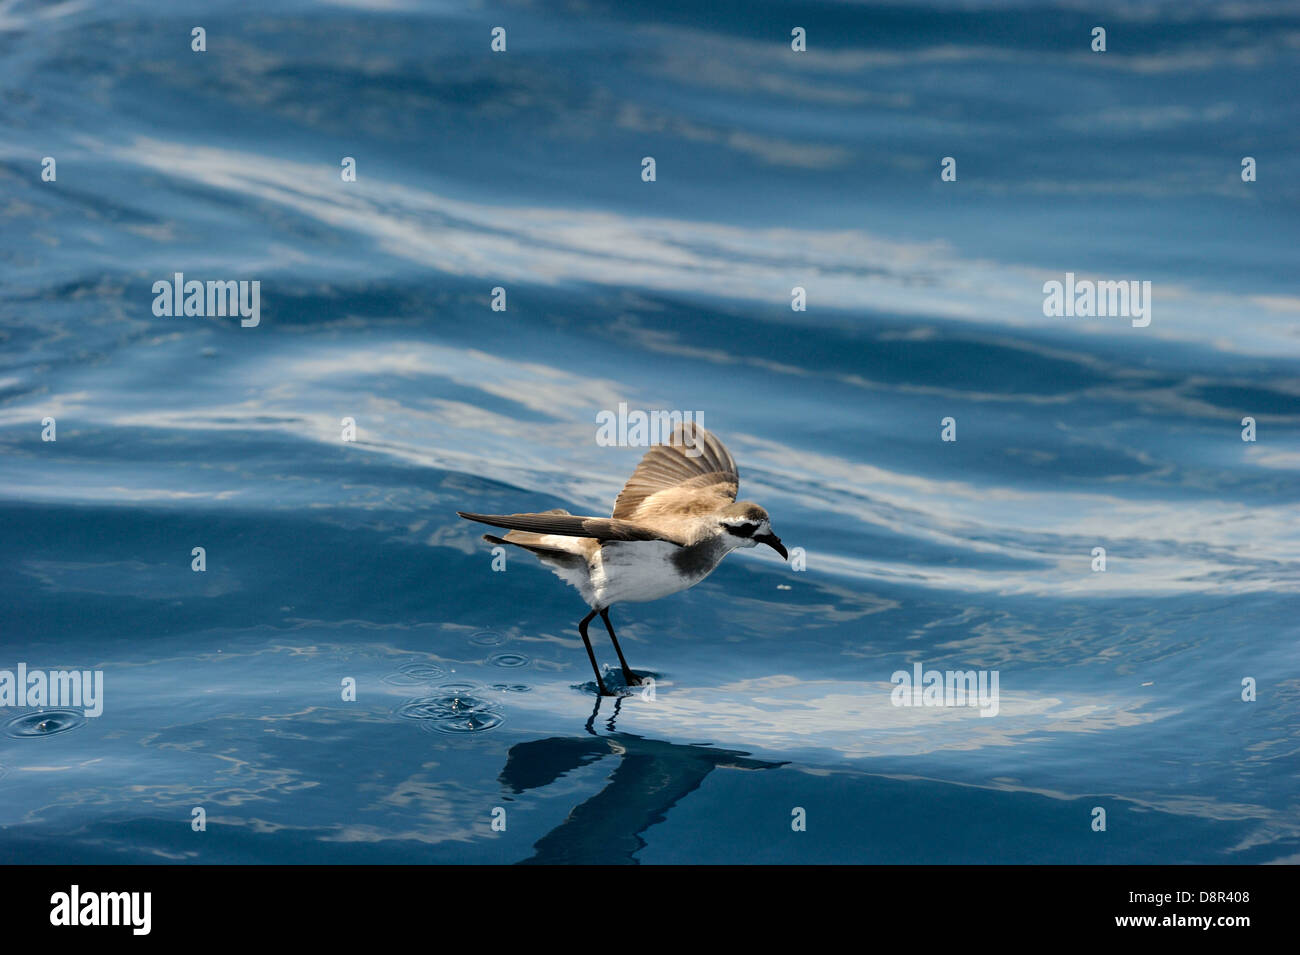 White-faced Storm (Frigate) Petrel feeding over ocean off North Island New Zealand Stock Photo